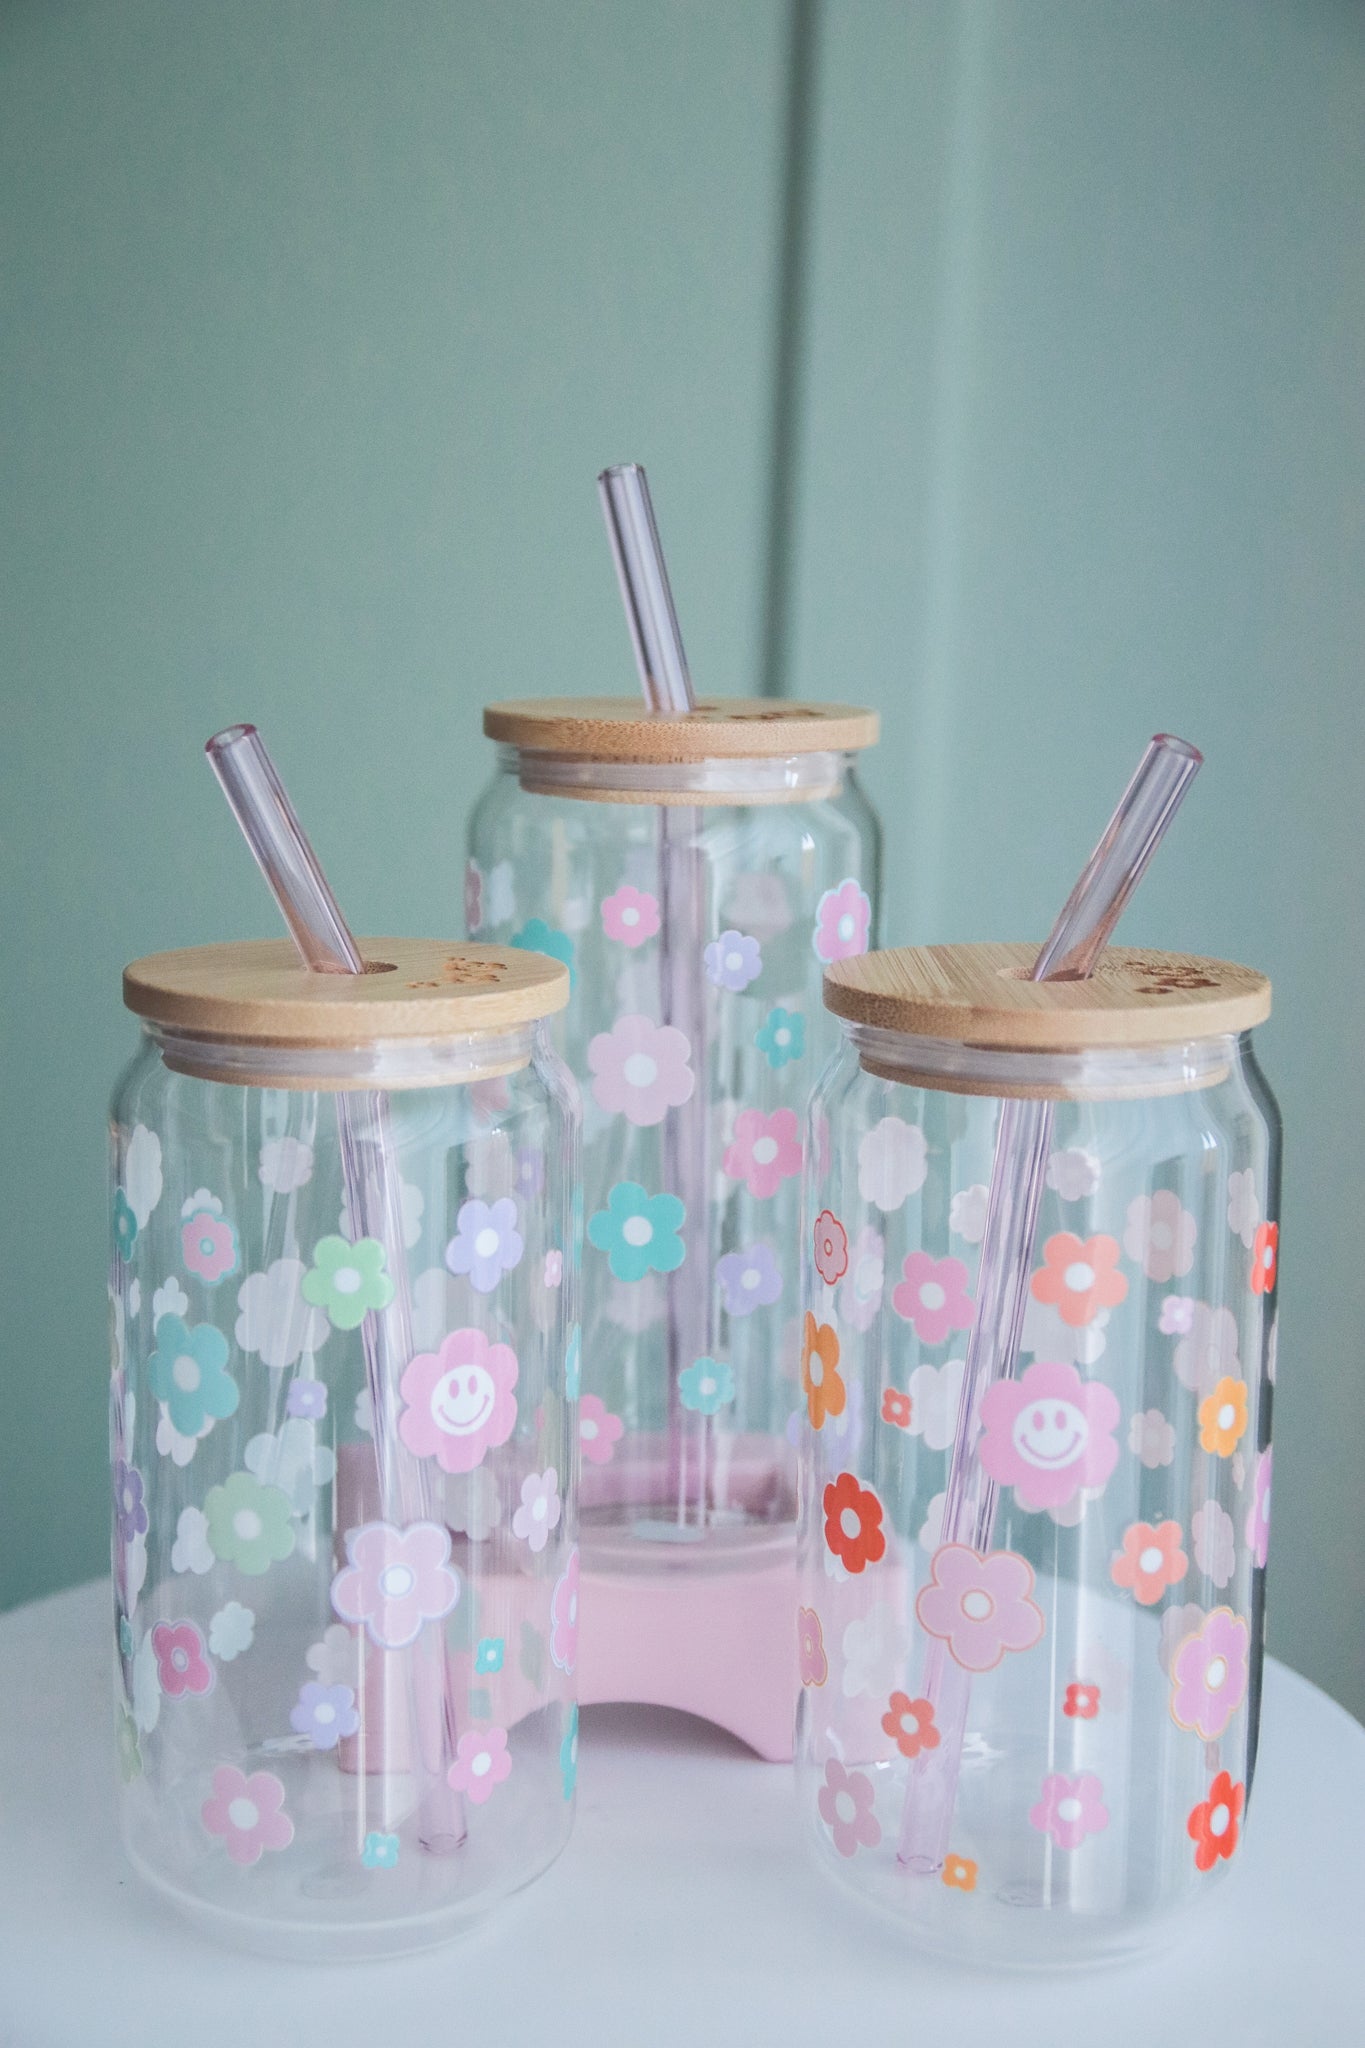 Retro Flower Glass with Bamboo Lid and Straw